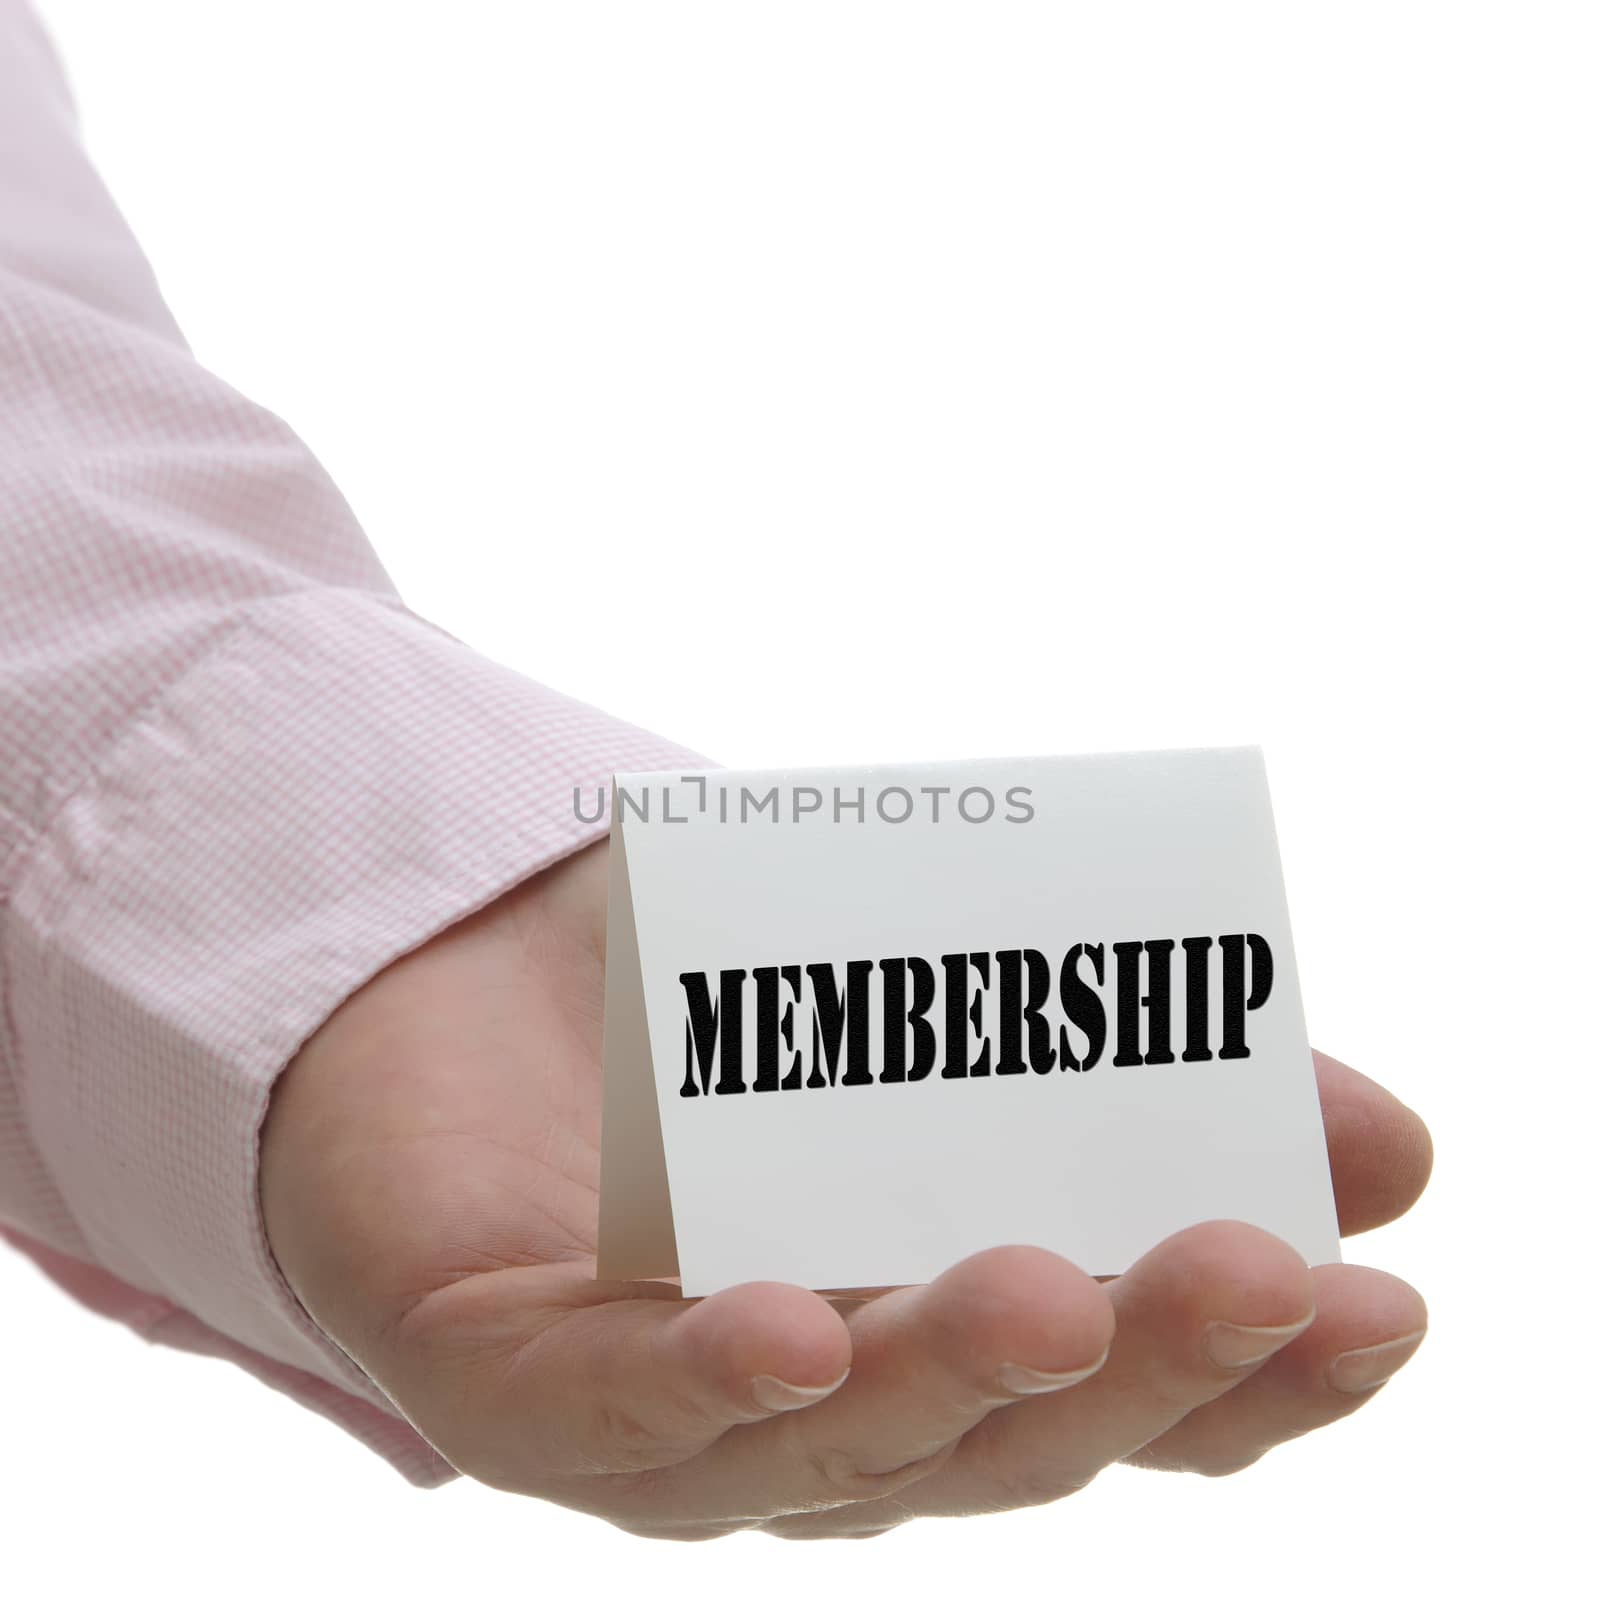 Business man holding membership sign on hand